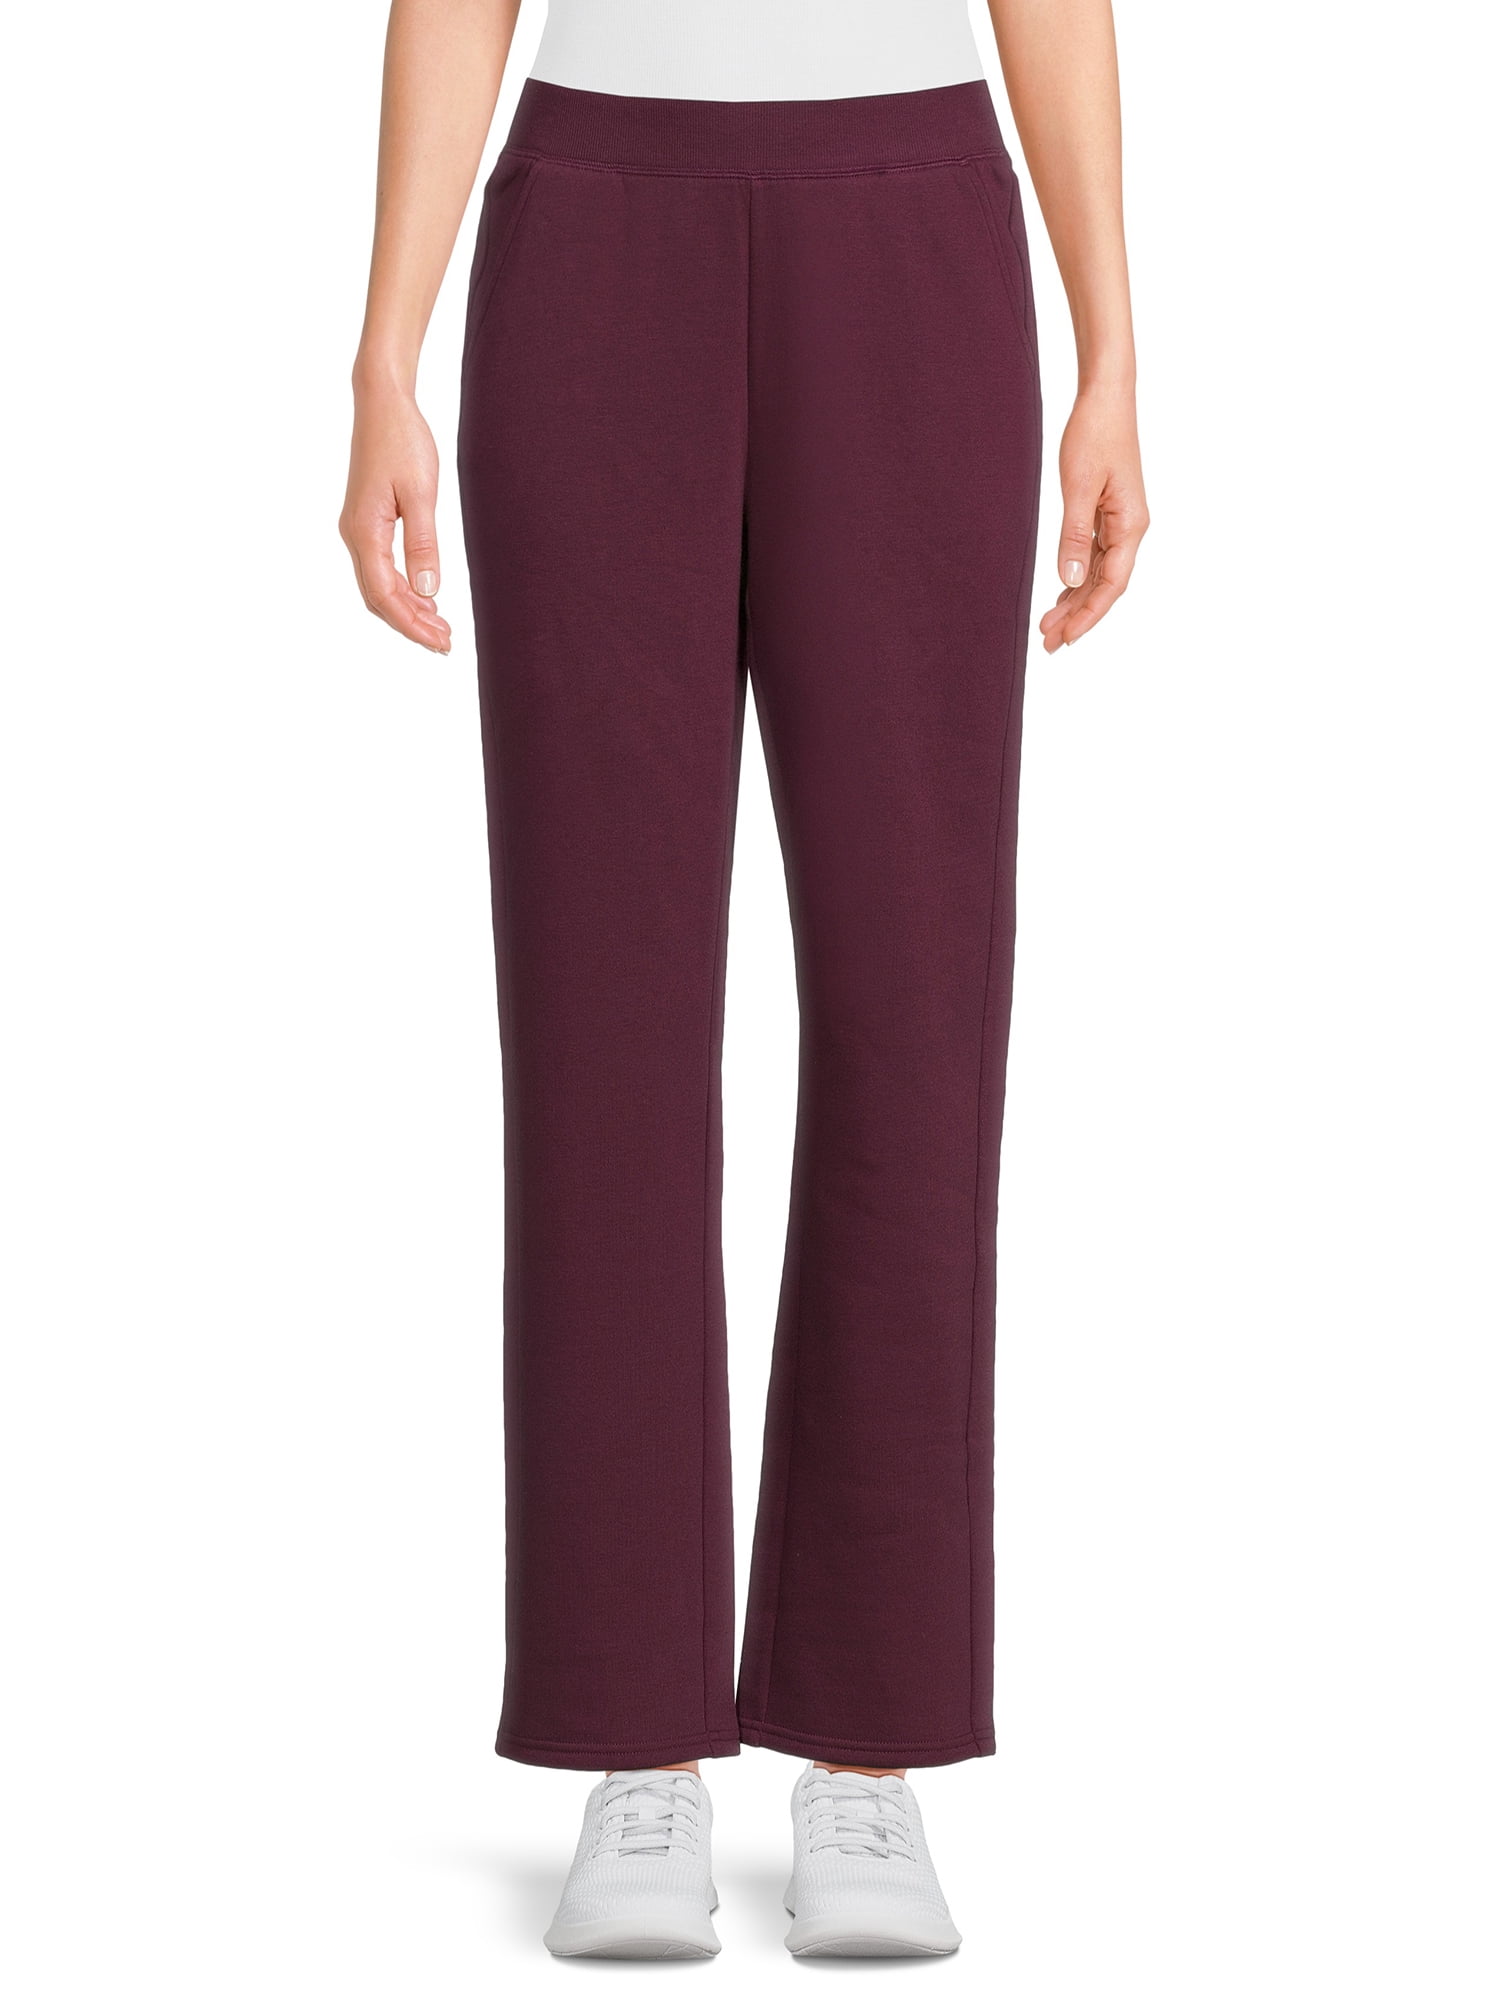 Athletic Works Women's Fleece Pants with Pockets, Sizes XS-3XL ...